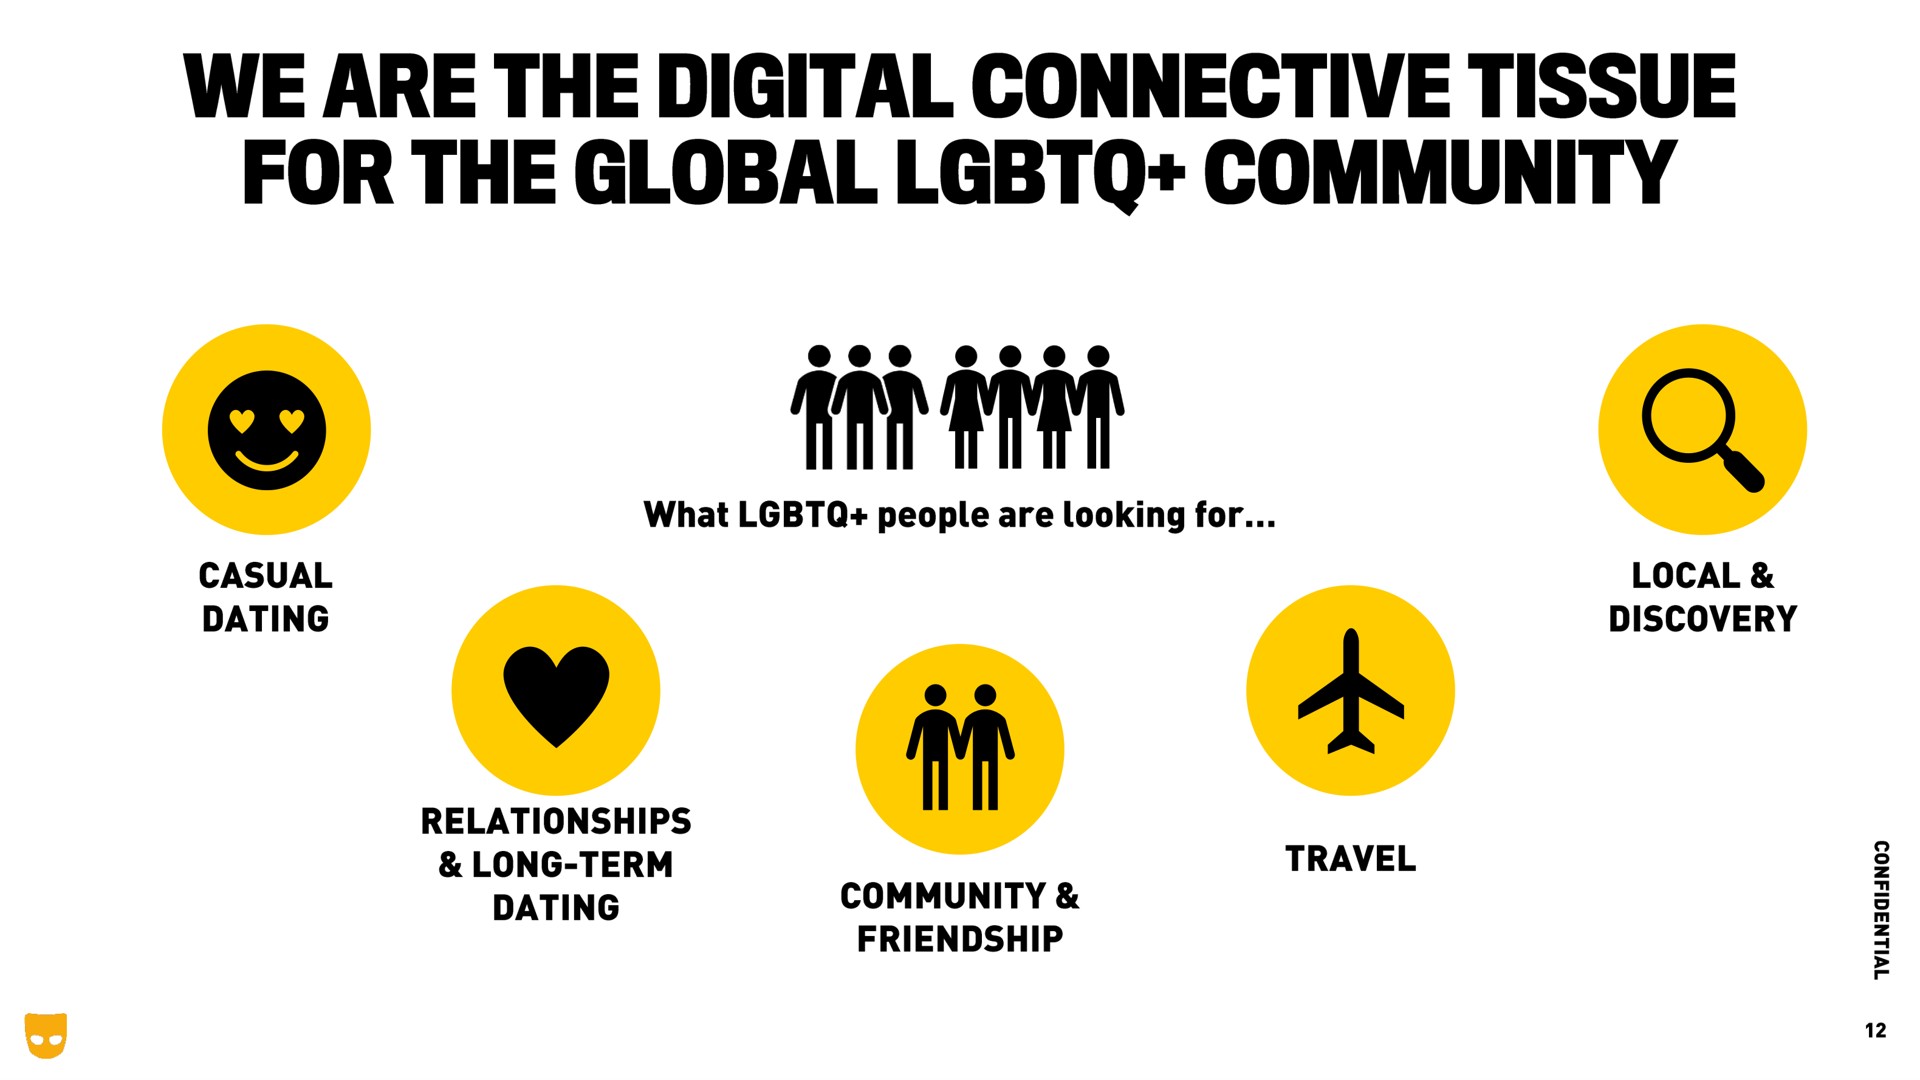 we are the digital connective tissue for the global community | Grindr